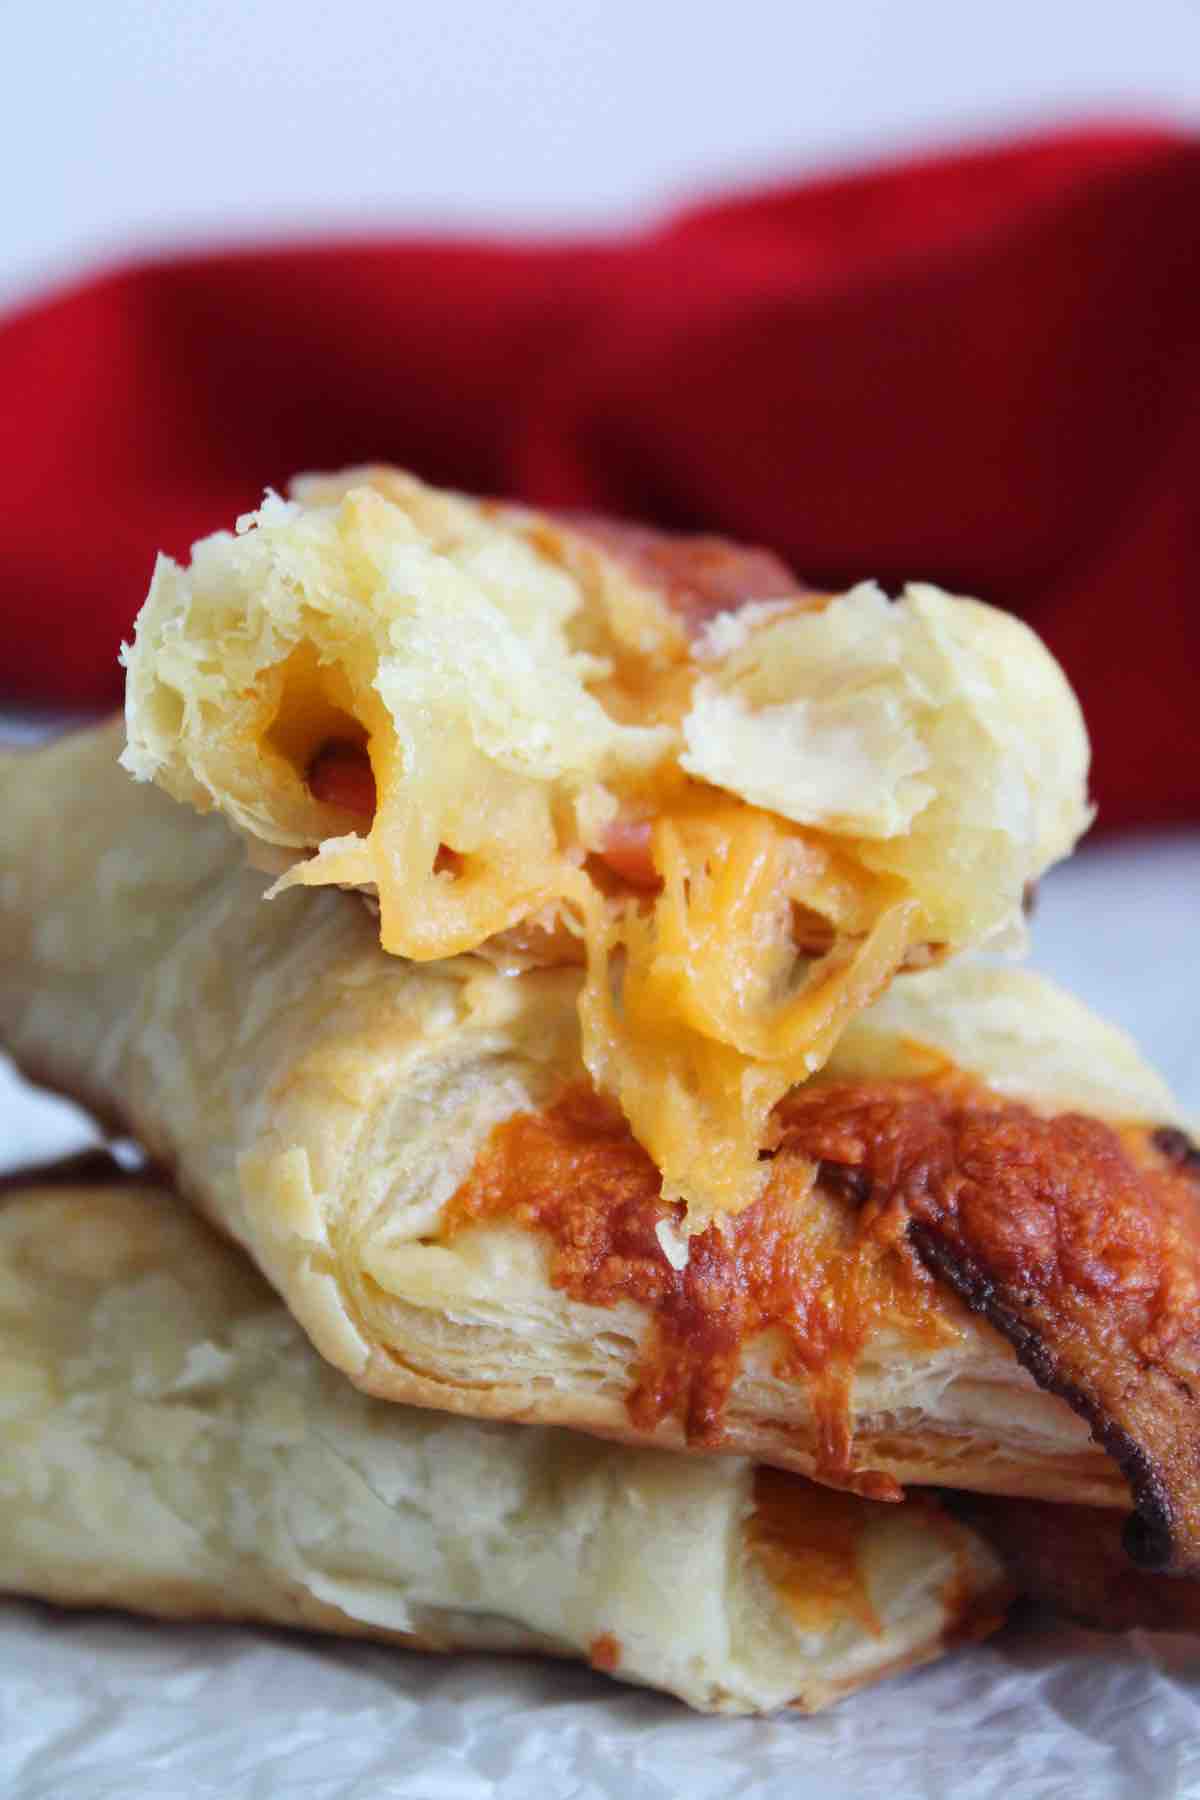 An easy recipe for baked bacon and cheese turnovers using puff pastry.